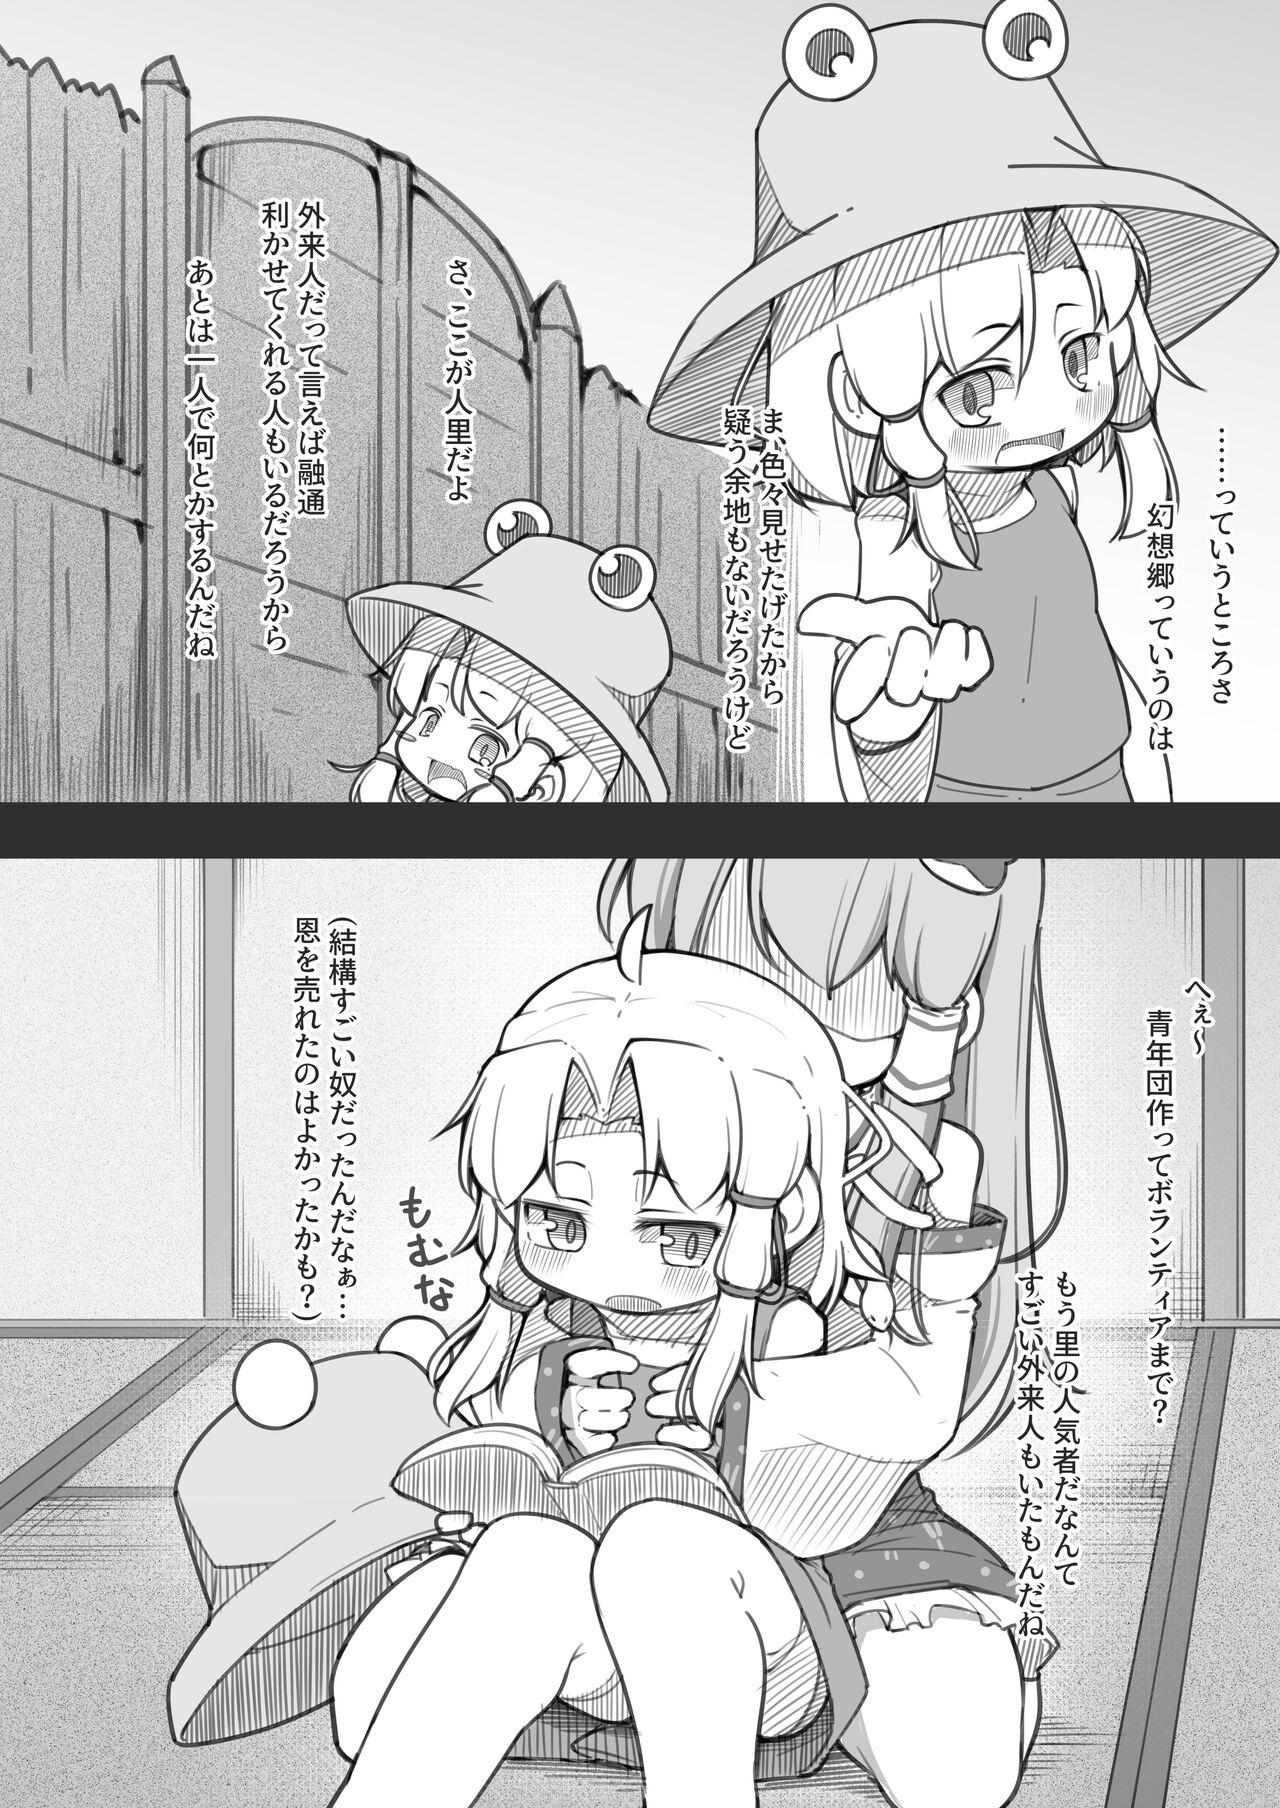 Sloppy Blowjob 幻想入りしたカリスマ教祖に諏訪子さまが祀り上げられる話 - Touhou project Off - Page 3